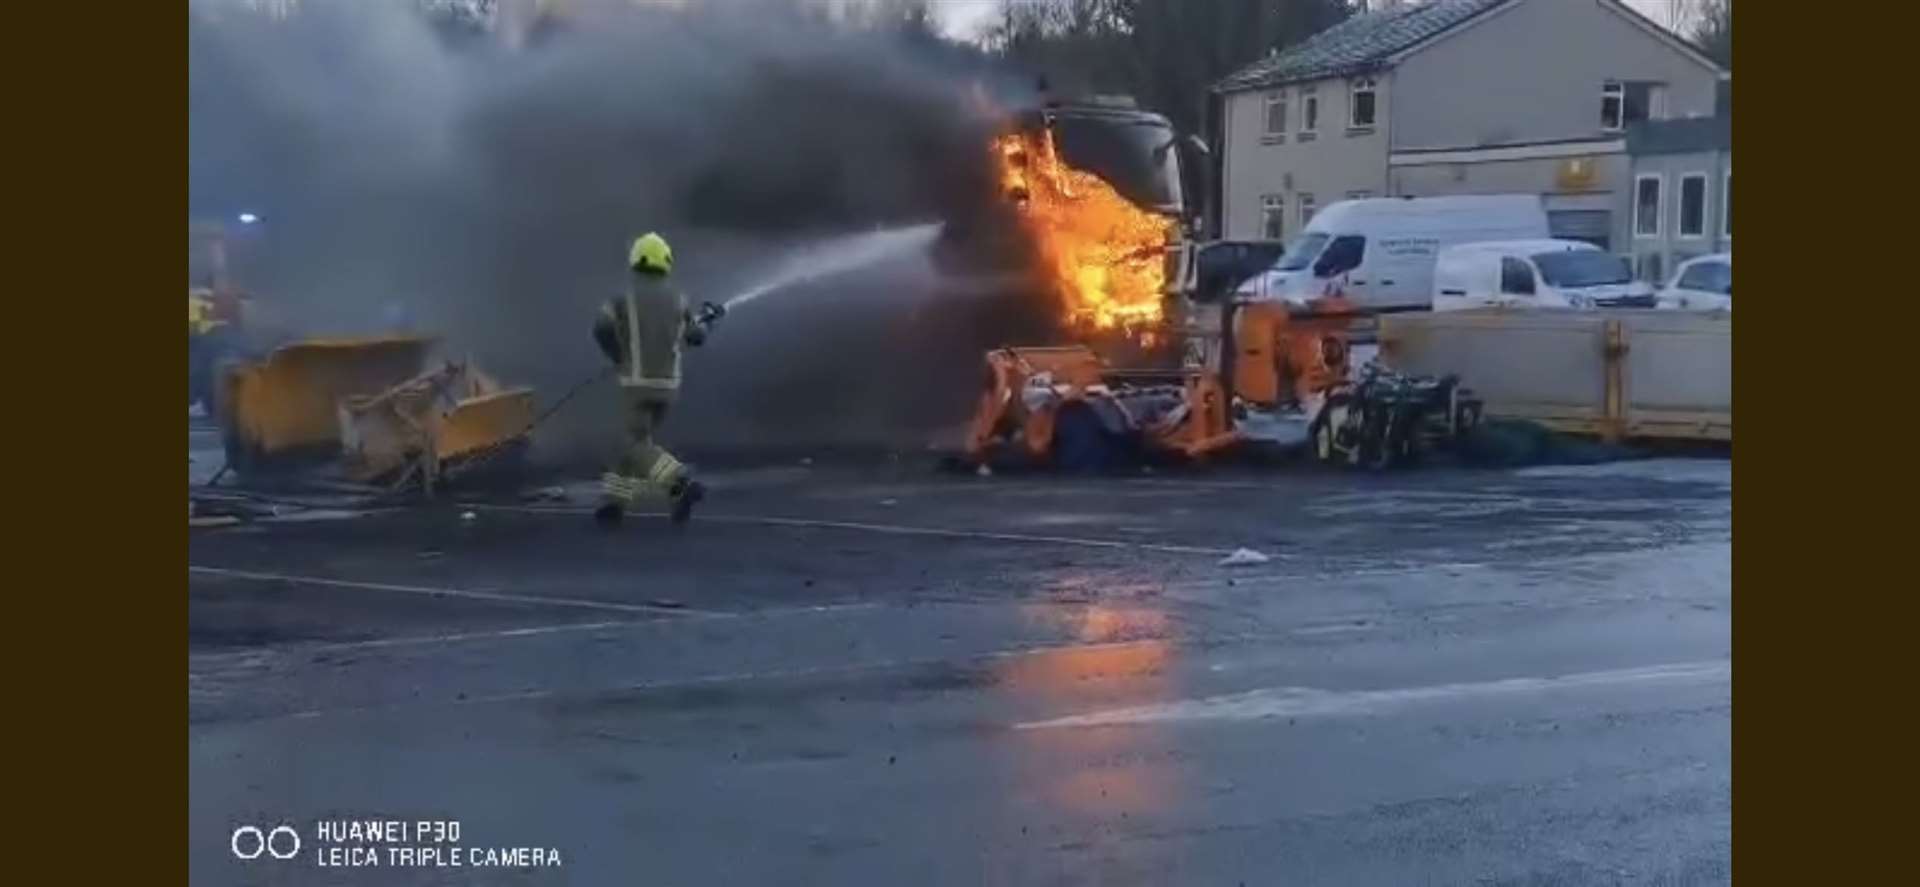 Gritter fire in Inverness.